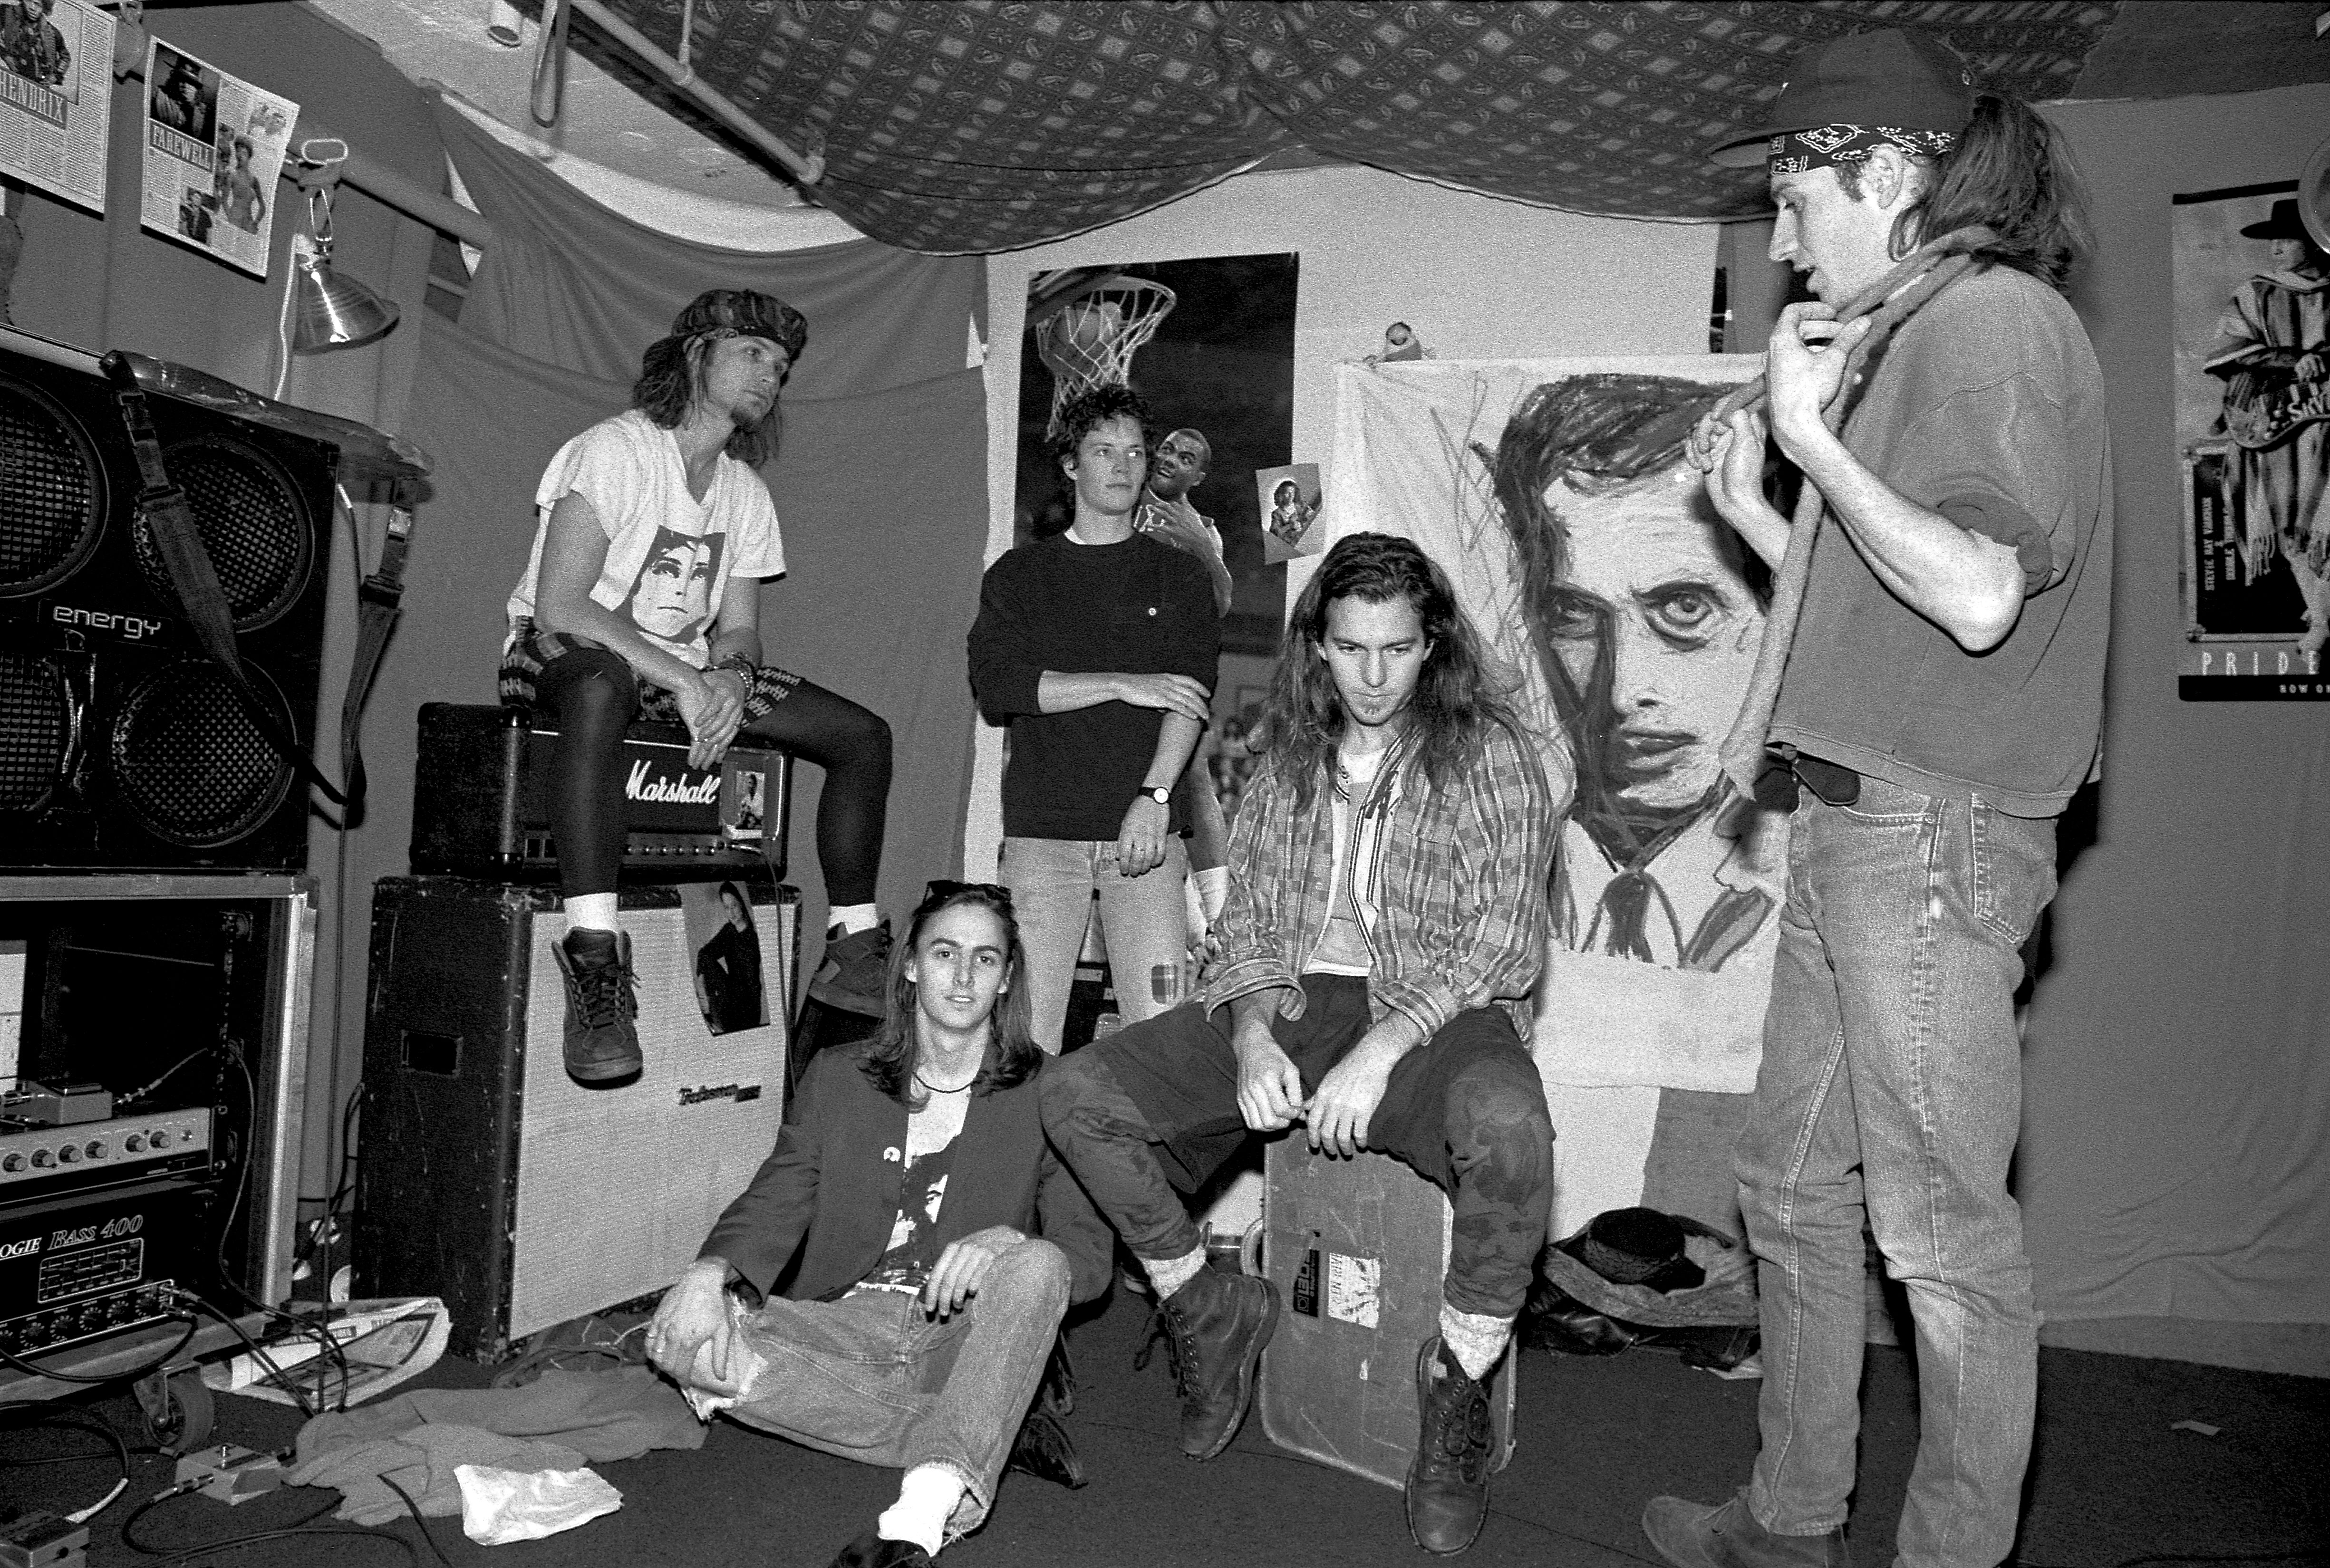 The story of Pearl Jam, from a Seattle basement to the Rock & Roll